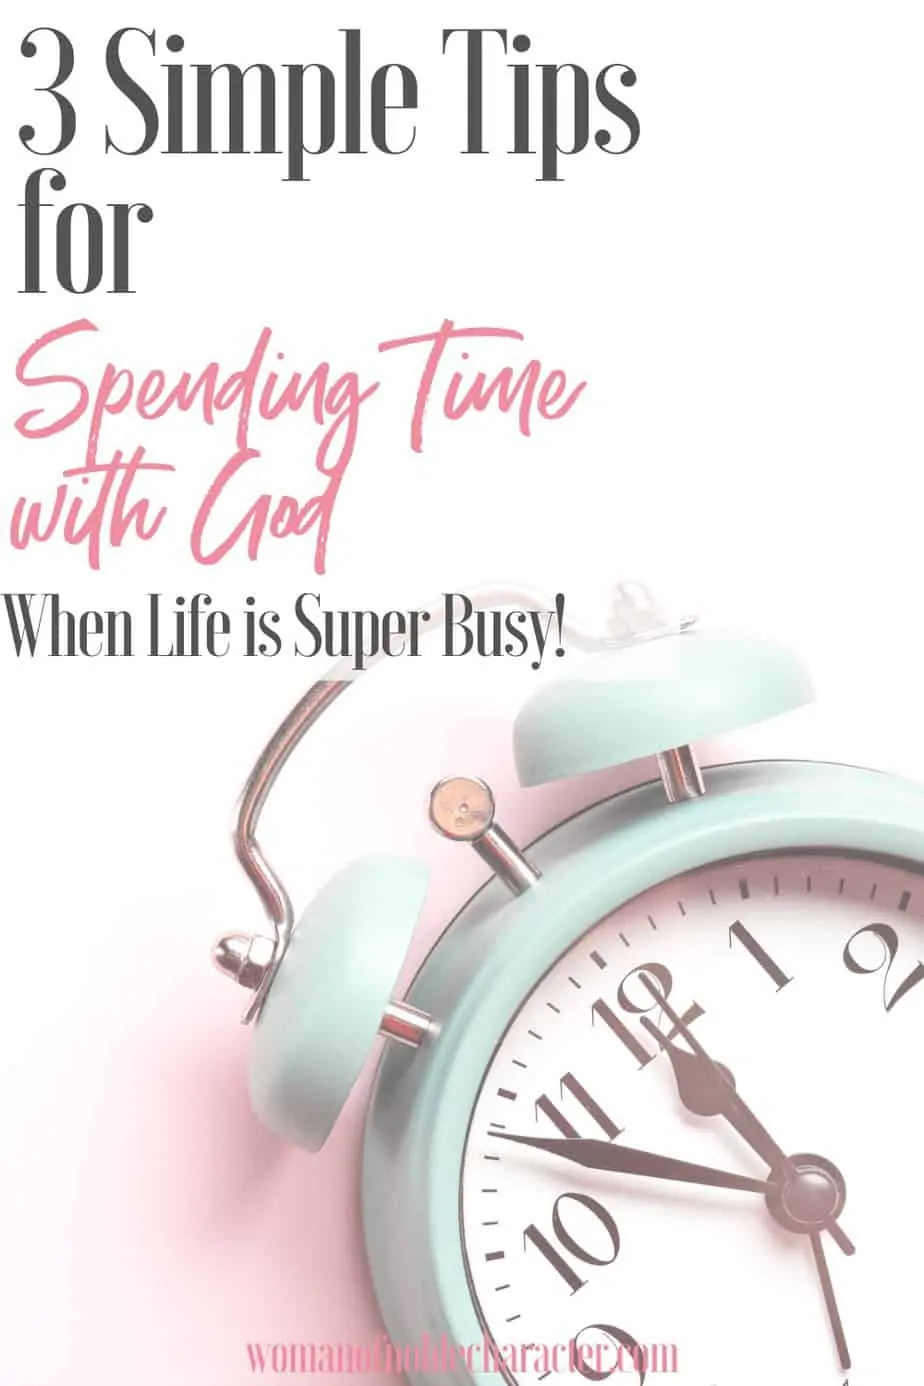 An image of an pastel blue alarm clock in the lower right corner with a pink background and a text overlay that says 3 Simple Tips for Spending Time with God When Life is Super Busy!